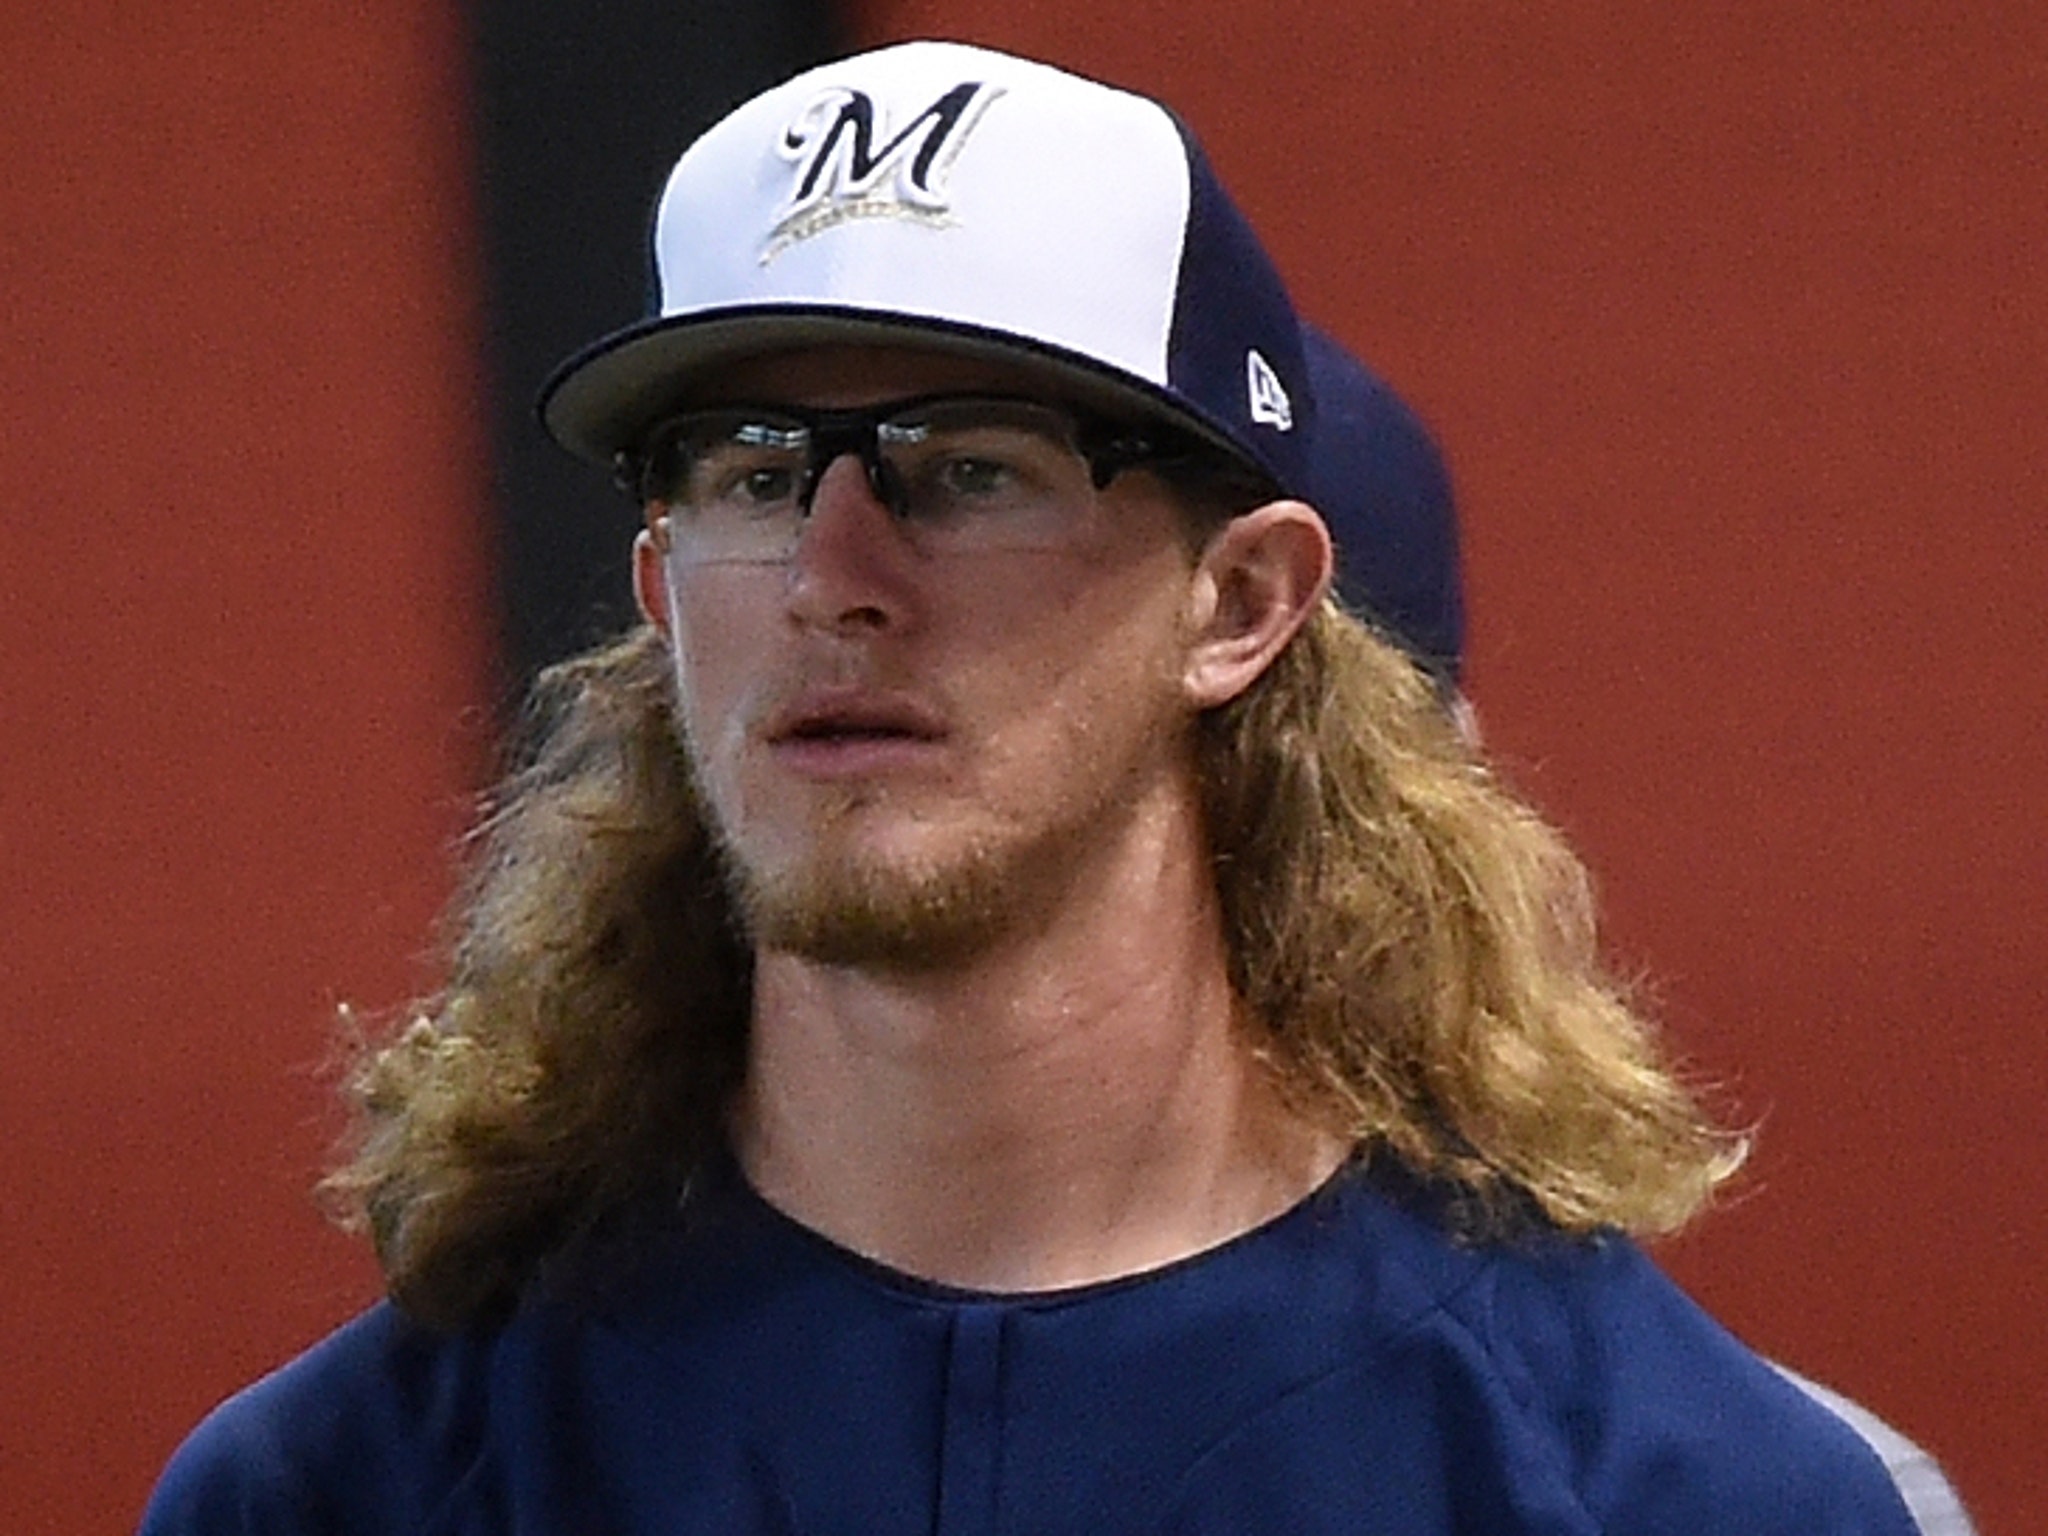 Offensive tweets from Josh Hader's past surface during MLB All-Star Game -  Brew Crew Ball